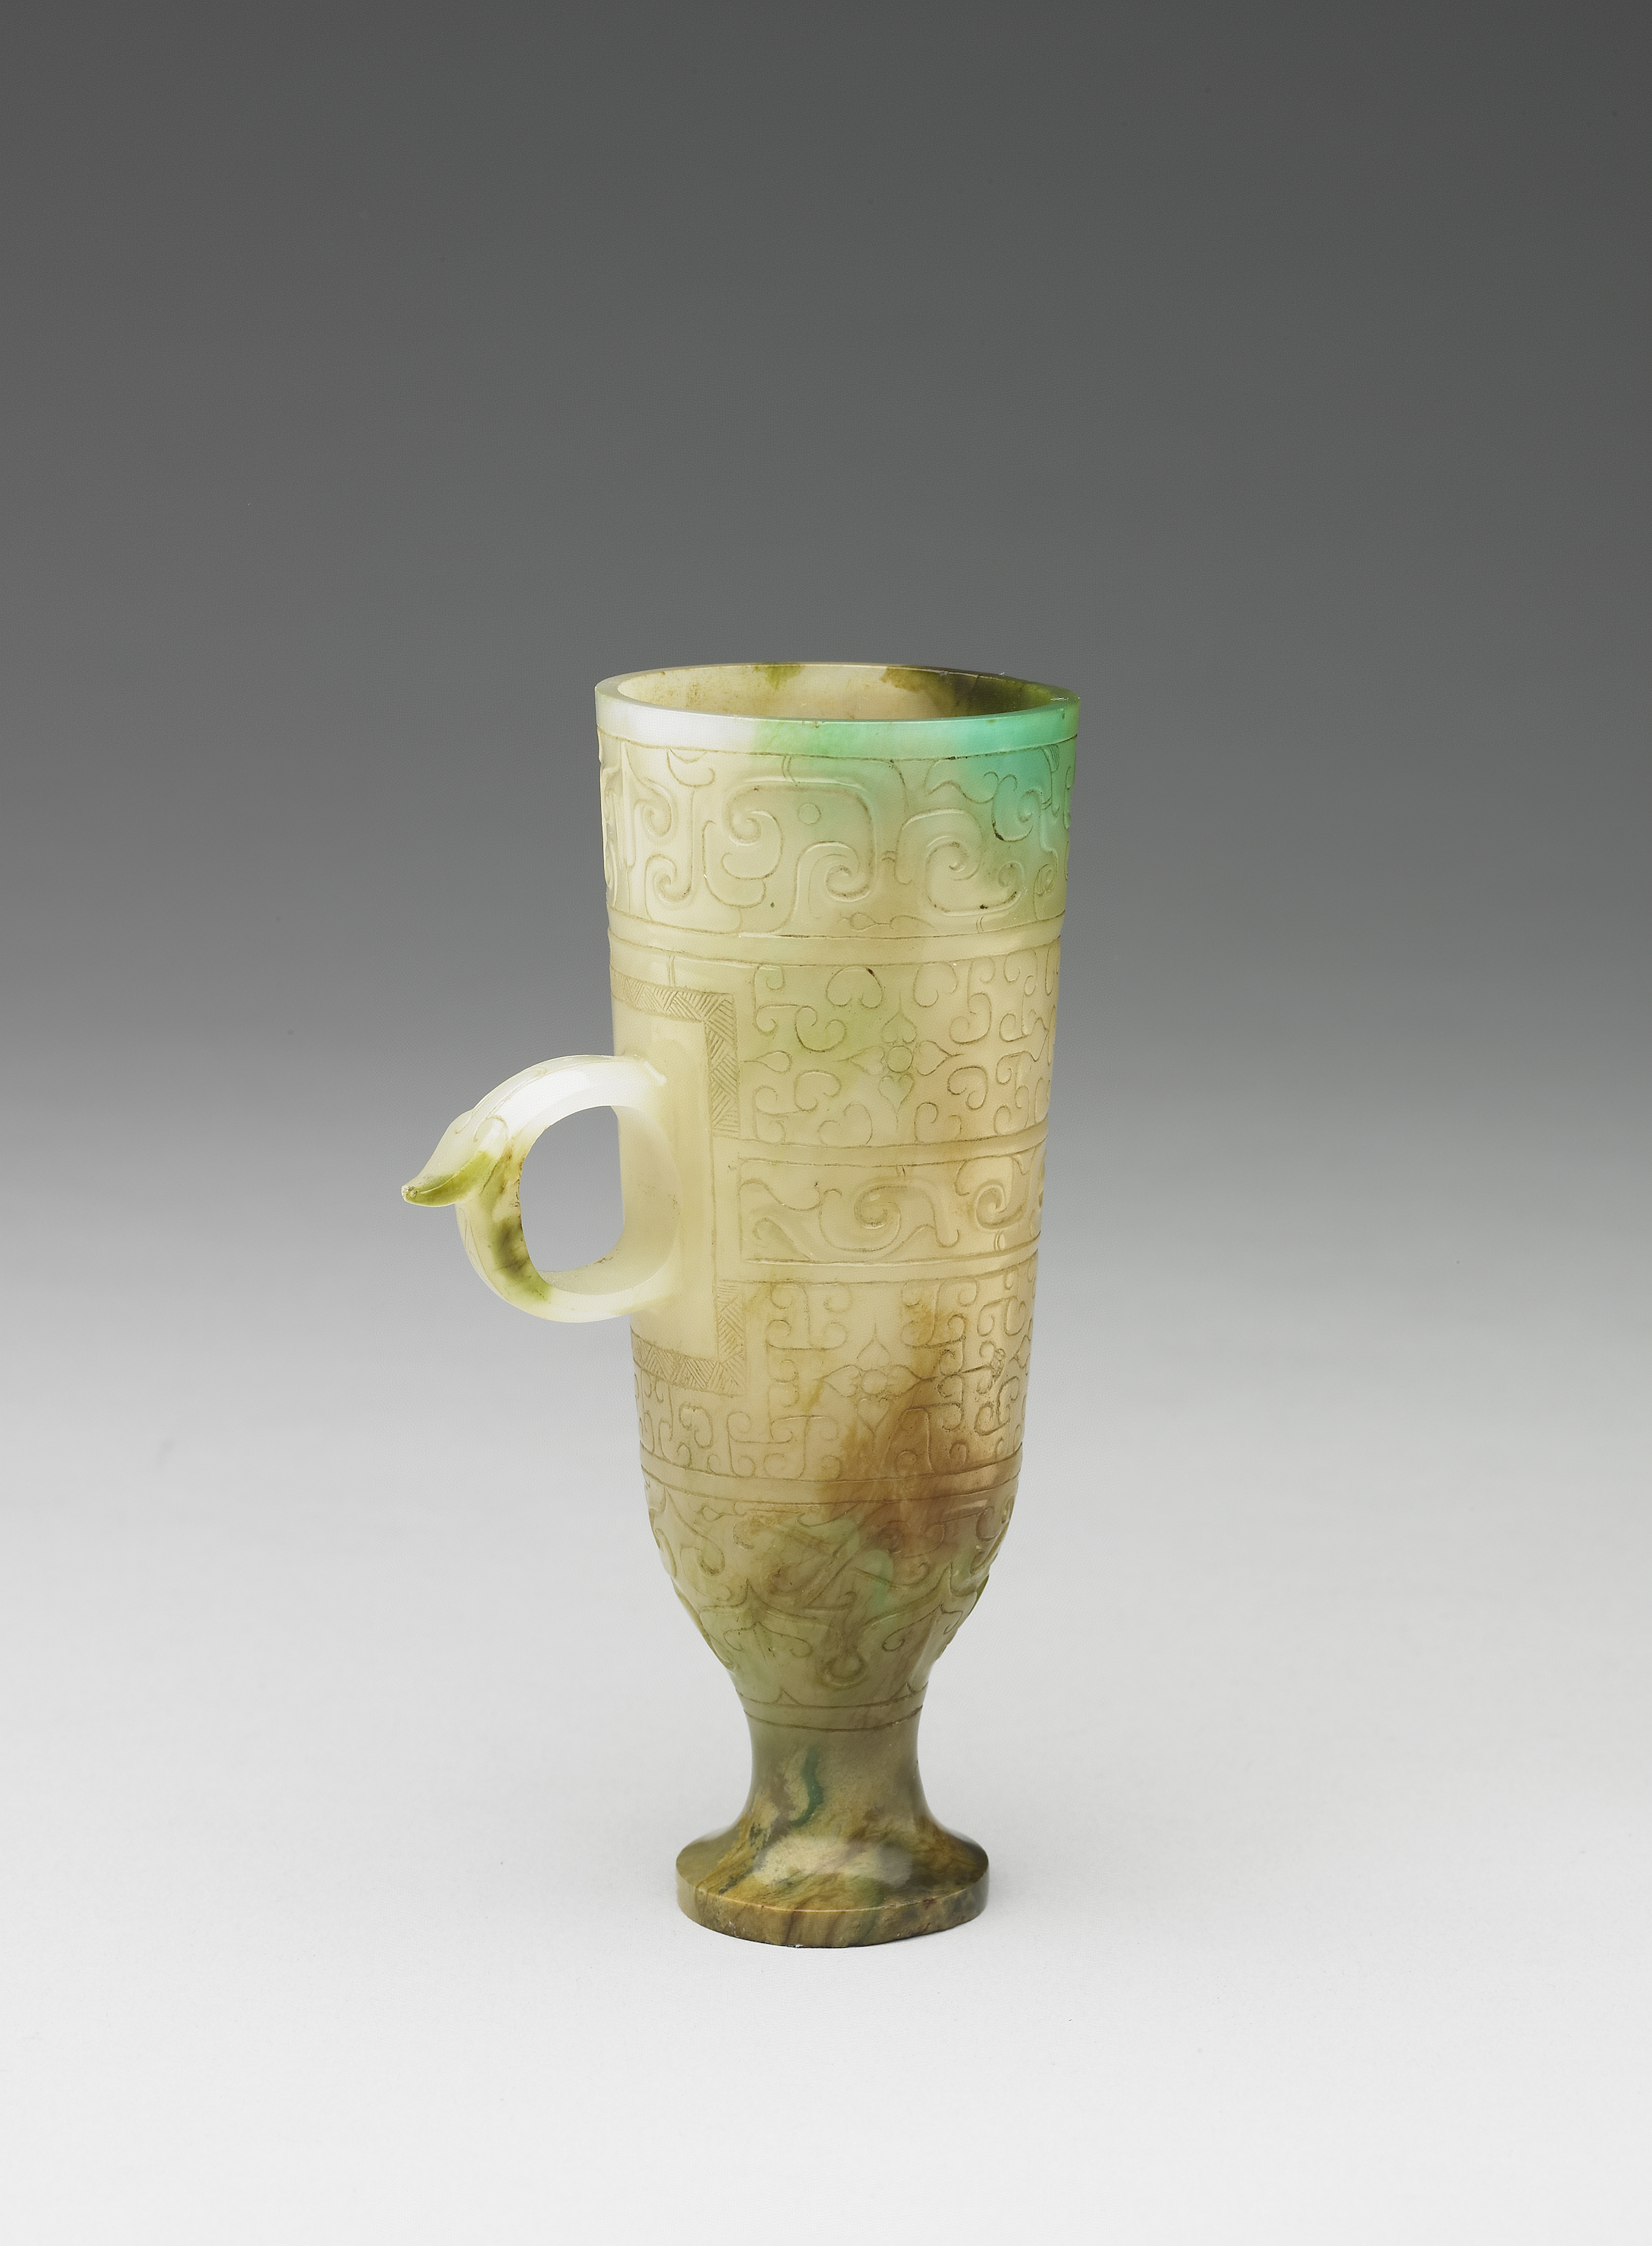 Jade Cup, early to middle Western Han dynasty, 206-74 BCE